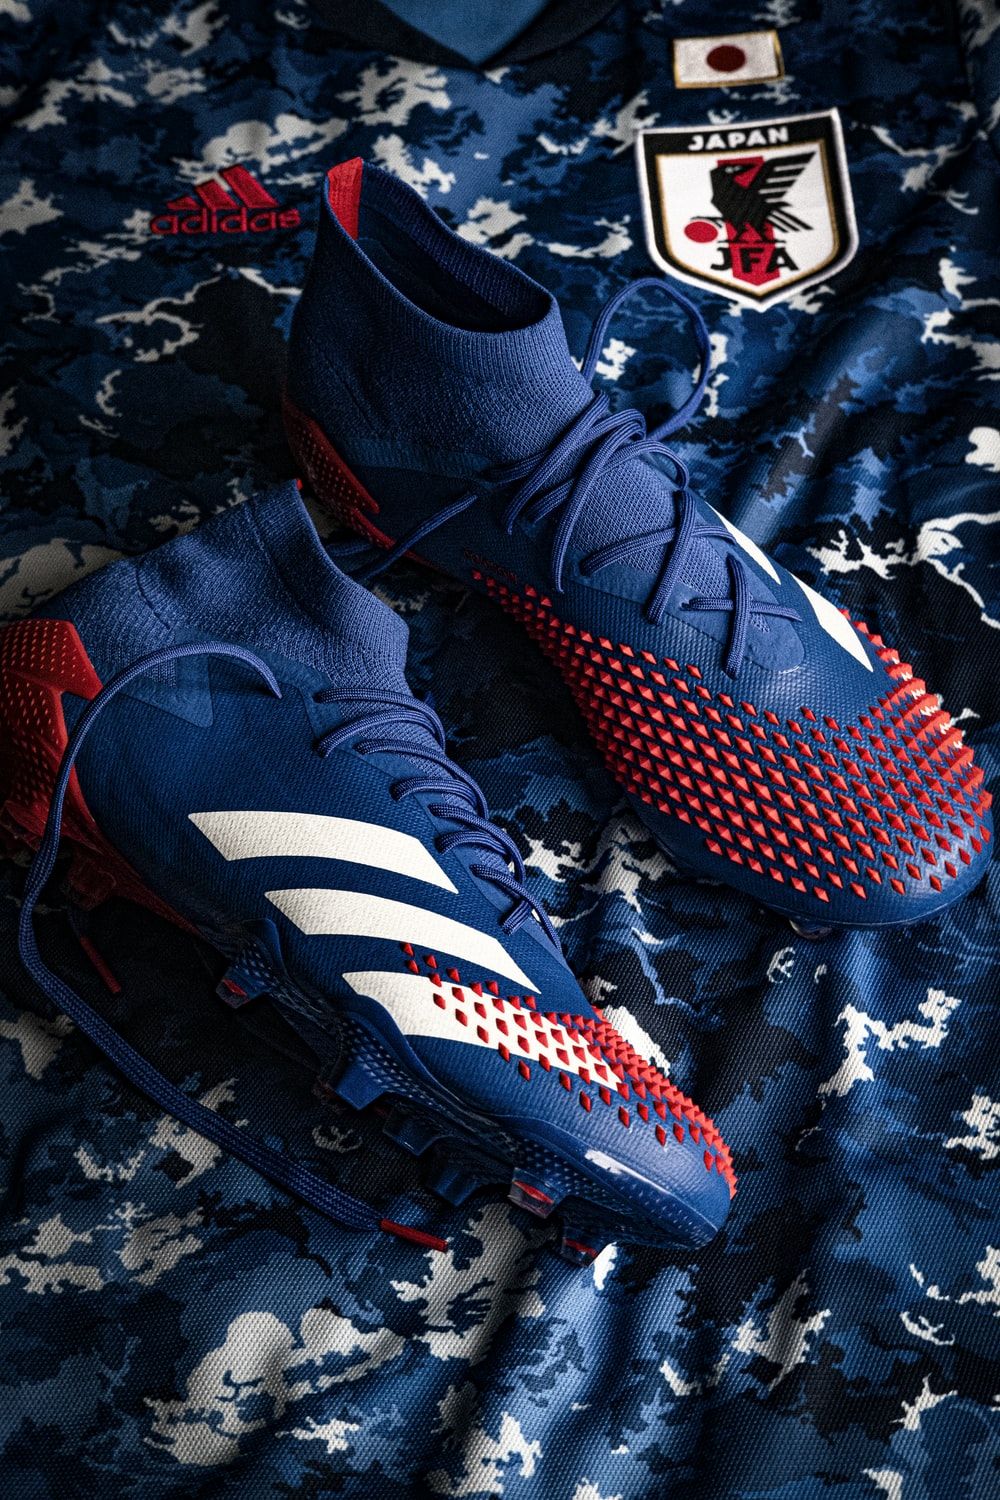 Football Boots Picture. Download Free Image